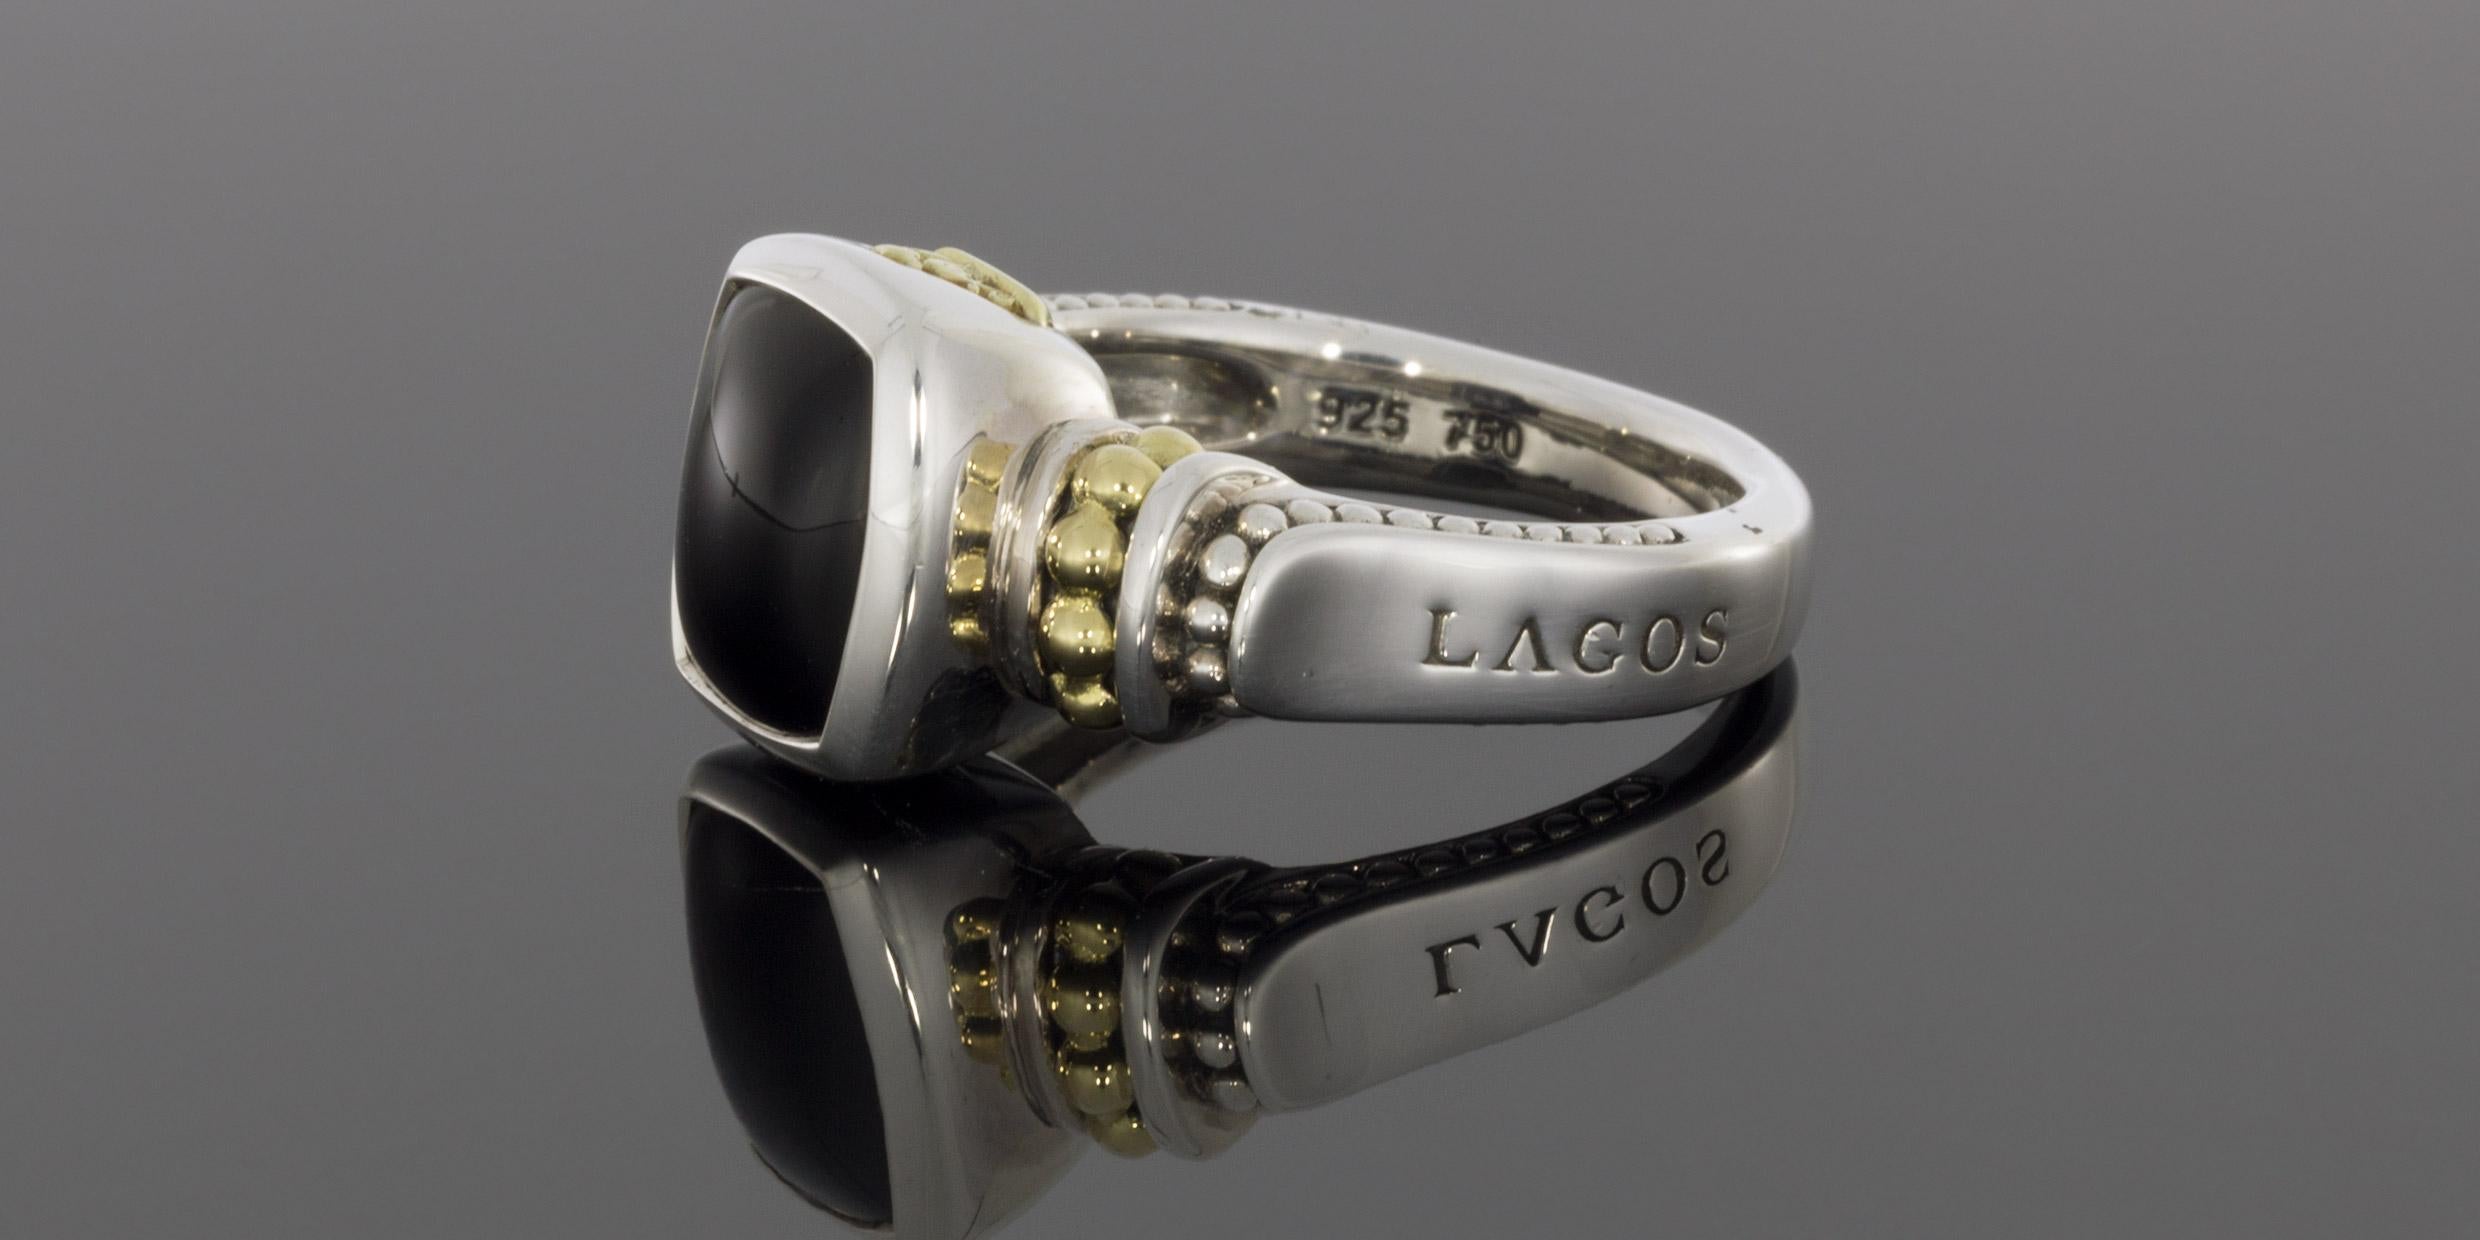 Item Details

Main Stone Onyx
Main Stone Color Black
Main Stone Shape Cabochon
Main Stone Treatment Not Enhanced
Main Stone Creation Natural
Estimated Retail $495.00
Brand Lagos
Collection Caviar Color
Metal Gold & Silver
Style COCKTAIL
Ring Size